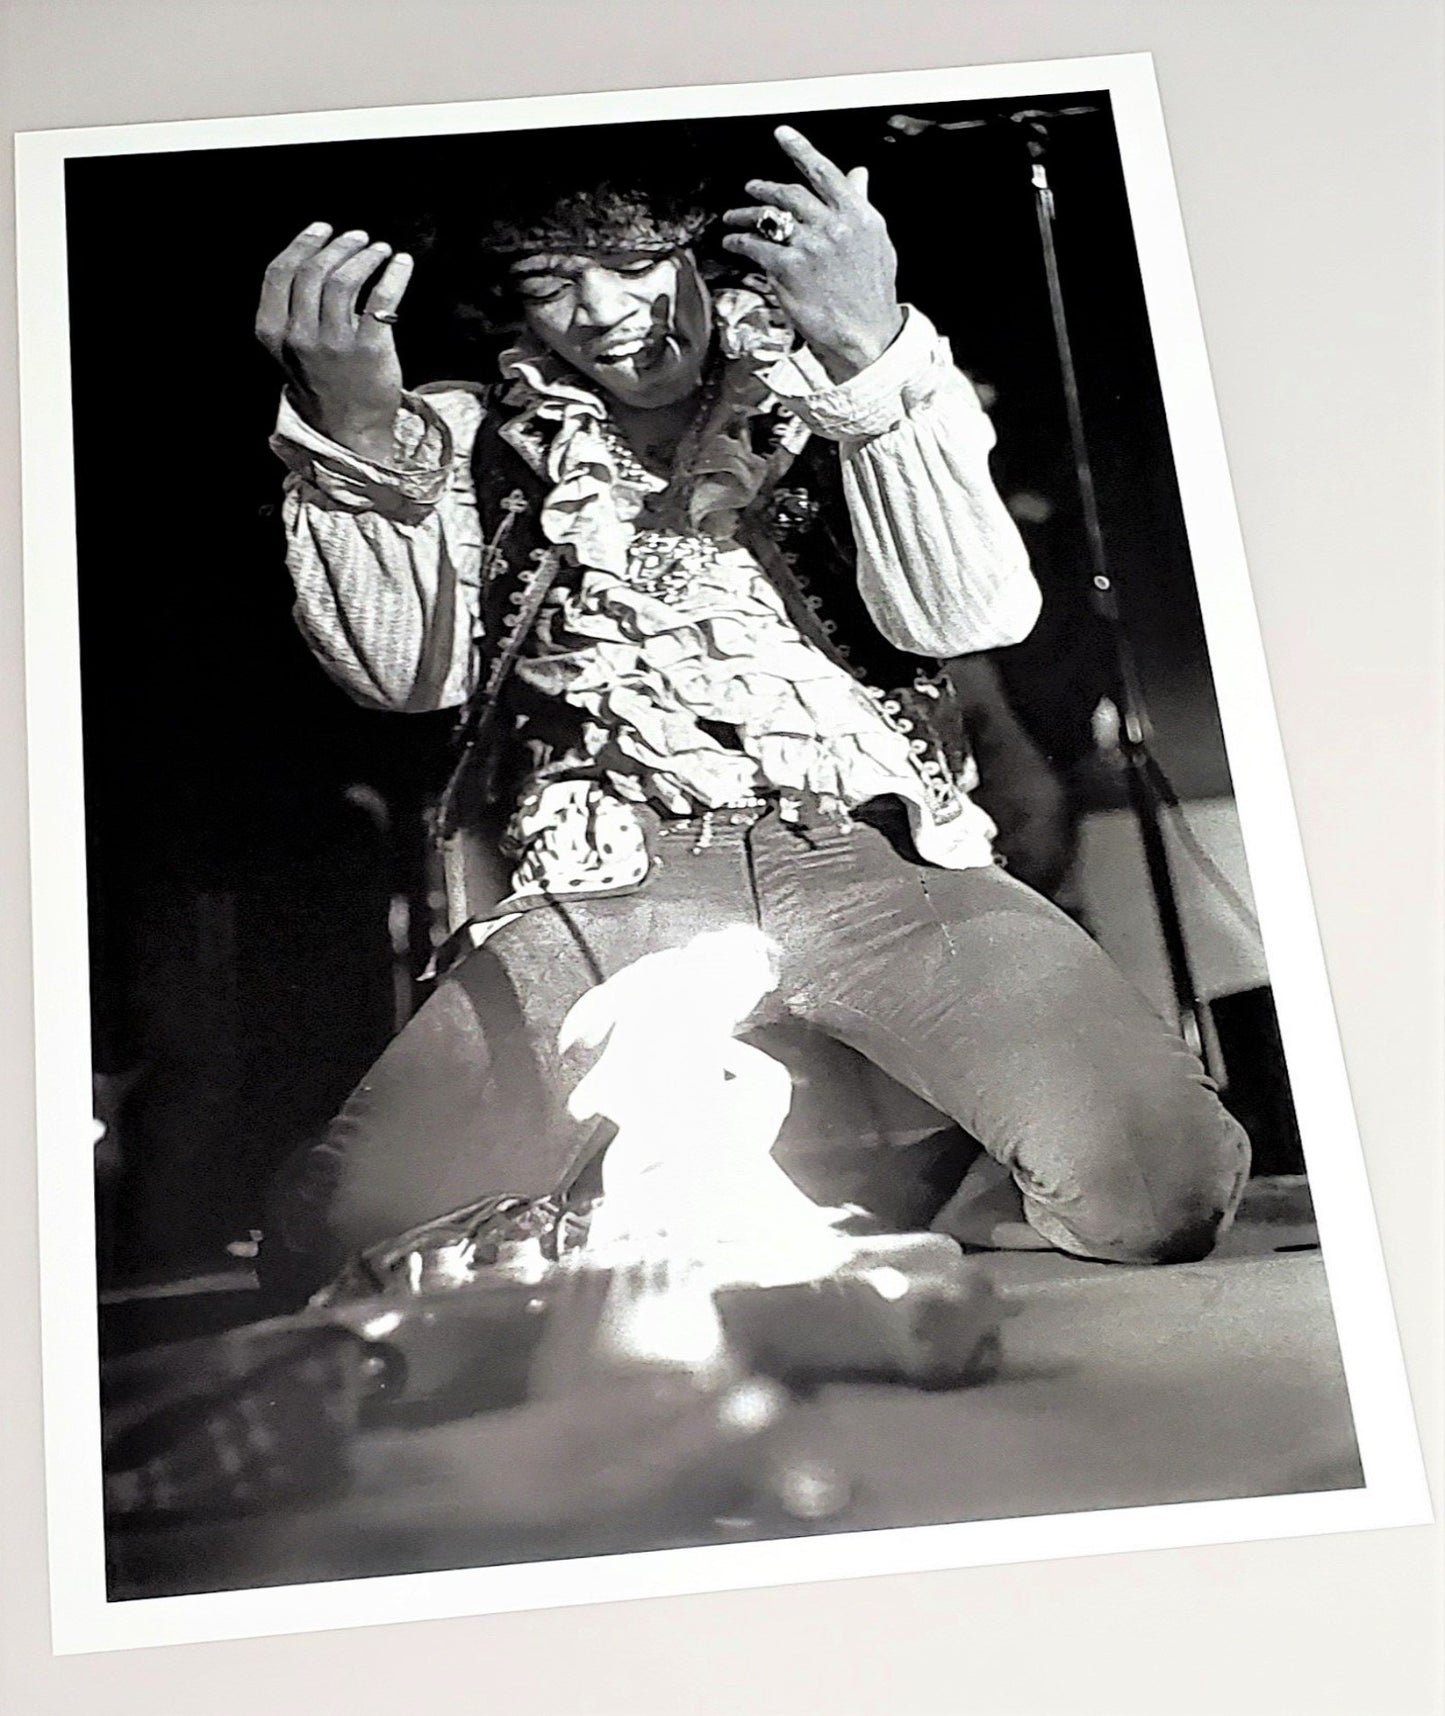  Jimi Hendrix photographed by Ed Caraeff in 1987 featured in 1989 Rolling Stone: The Photographs